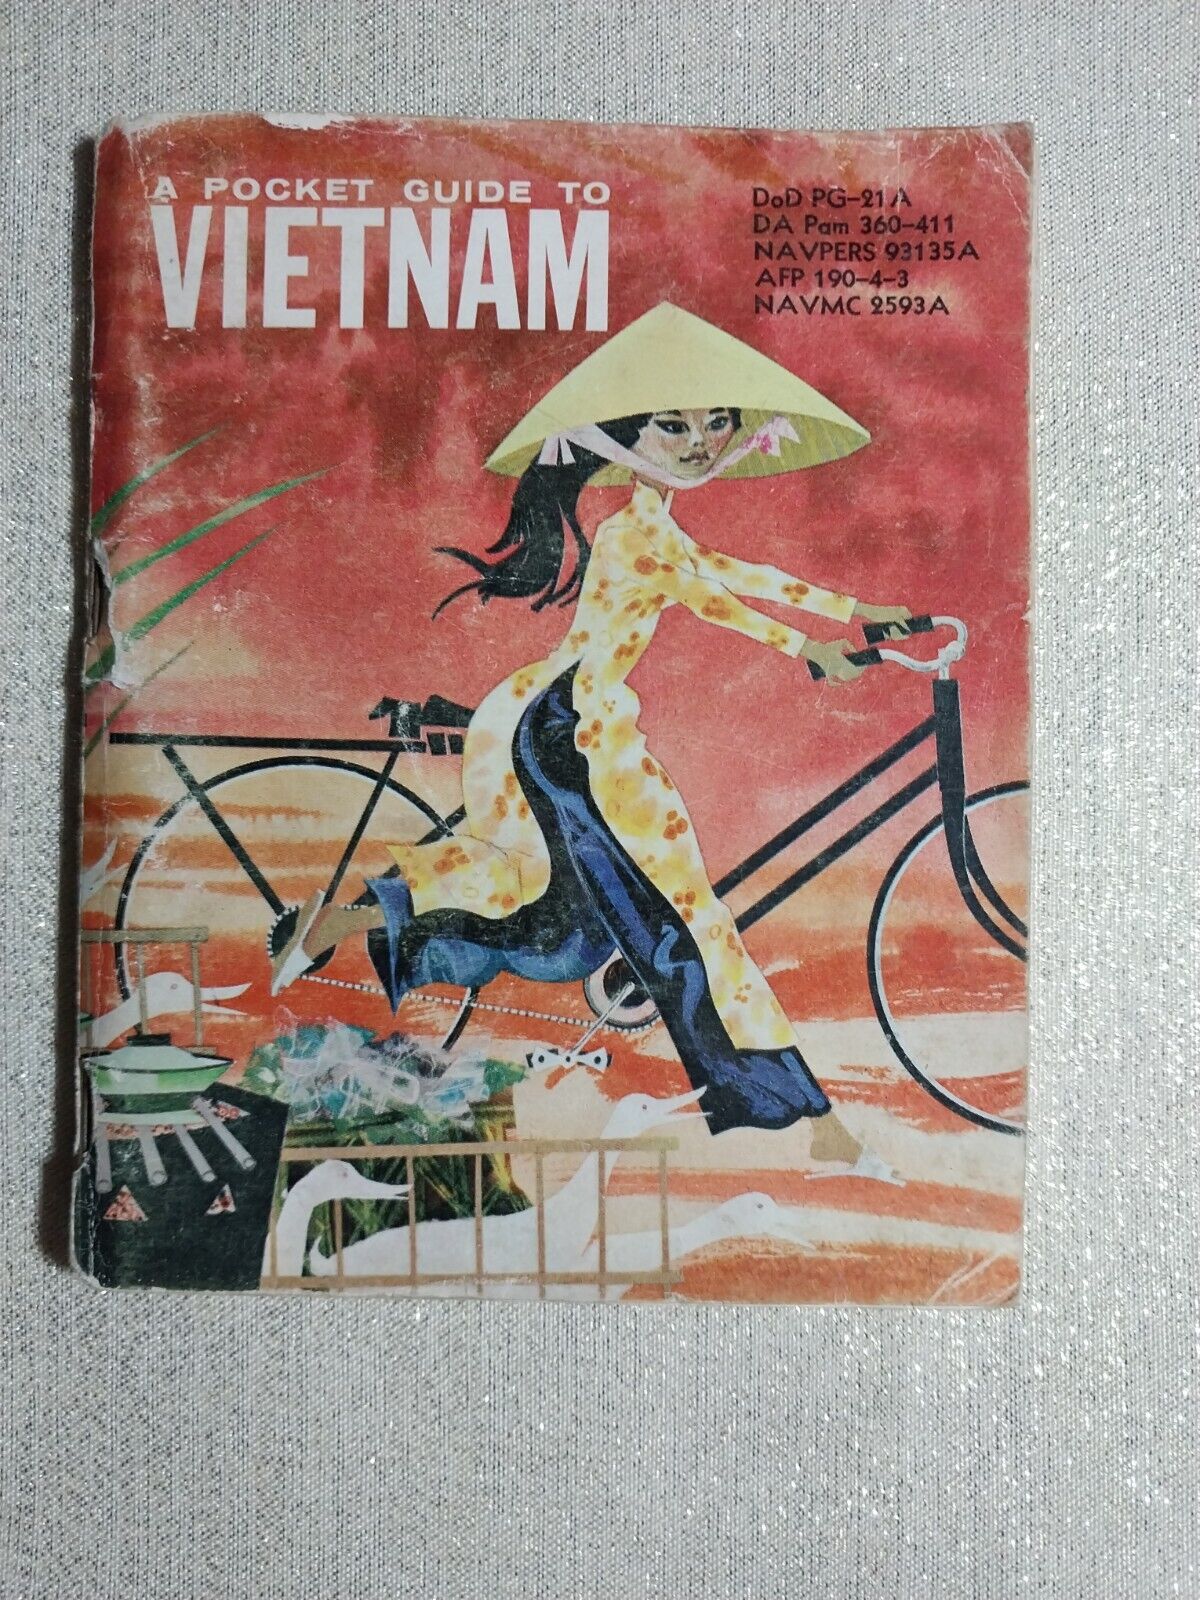 Pocket Guide to Vietnam 1962 Armed Forces Information & Education DOD PG-21A